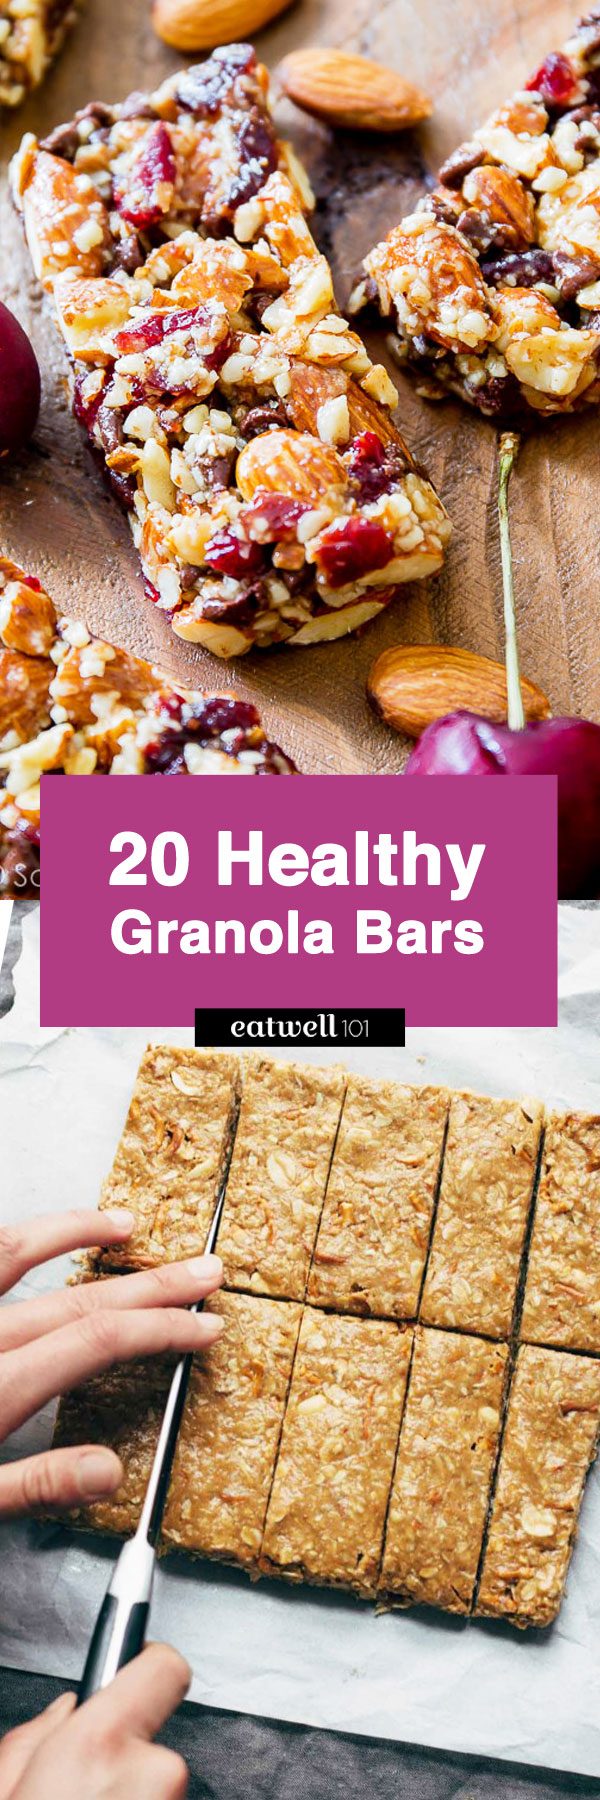 Healthy Homemade Granola Bars - If you want satisfy your snack cravings, these Healthy granola bars are your go-to nutrition companion to fuel your day!